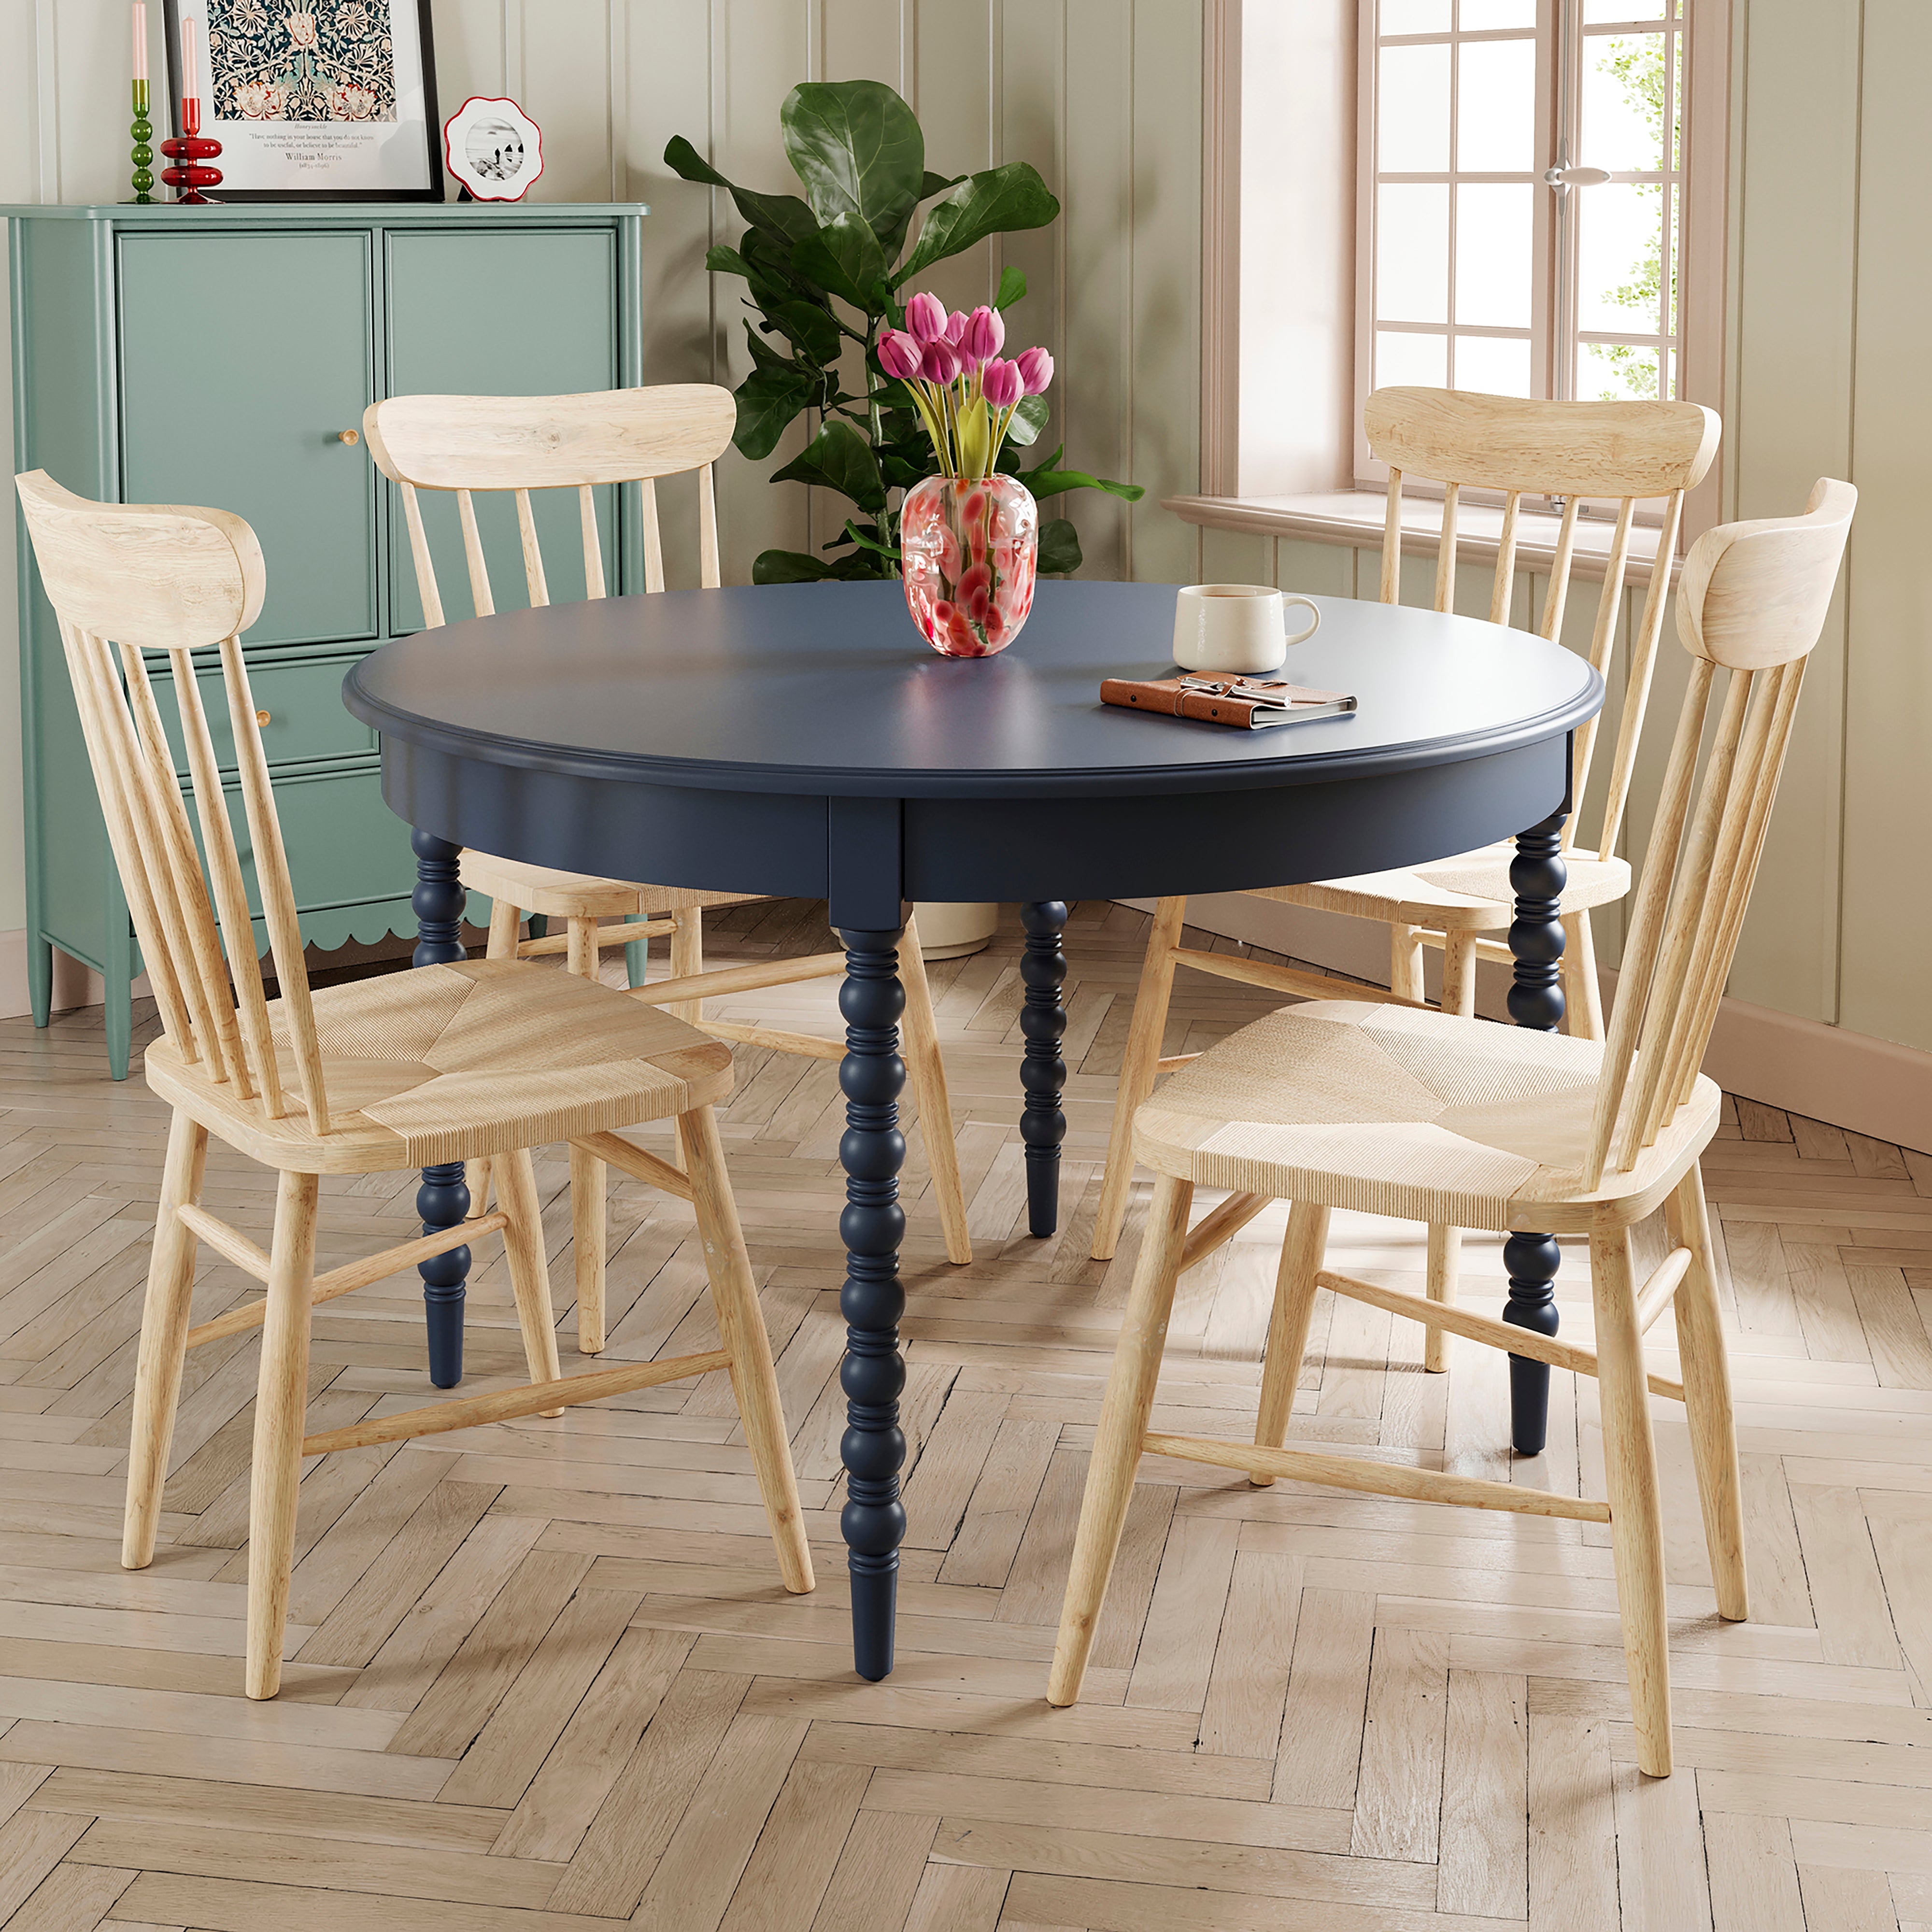 Pippin 4 Seater Round Dining Table, Navy